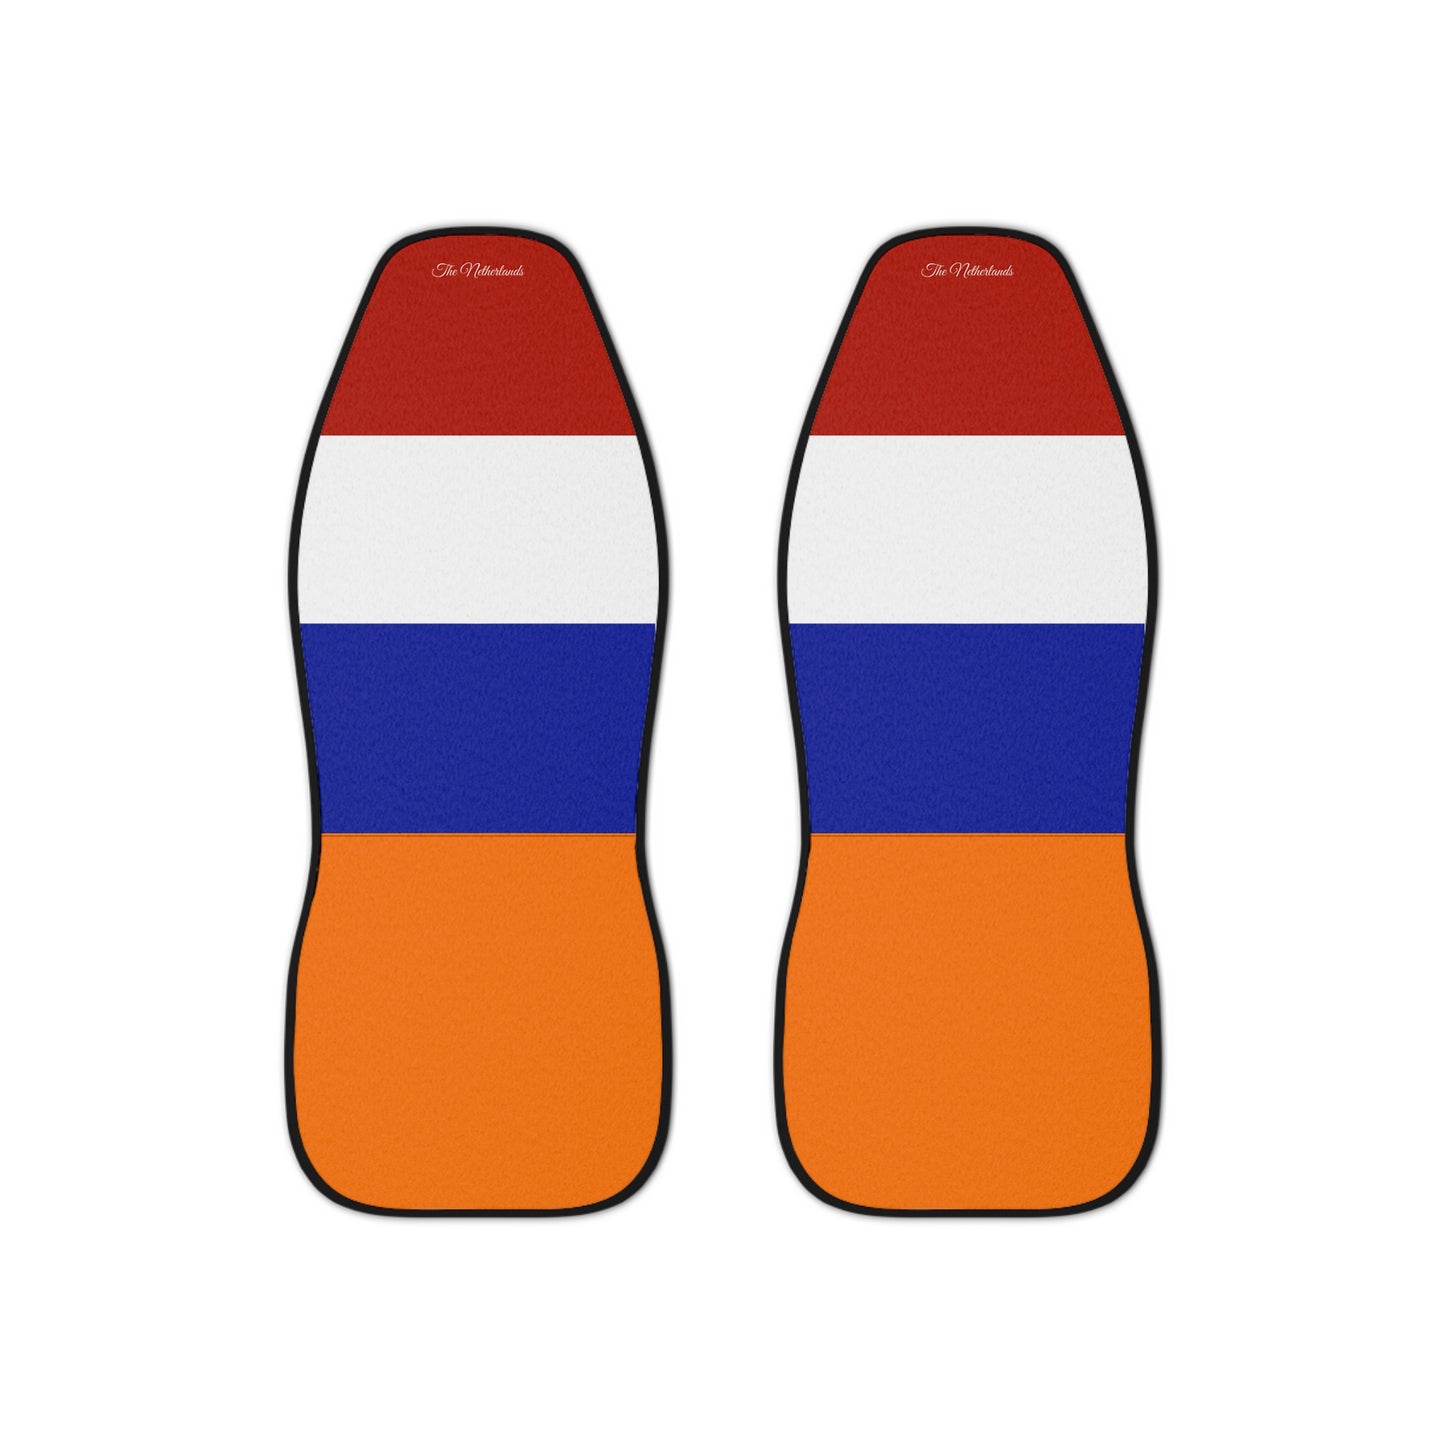 Set of Two The Netherlands Flag Car Seat Covers Universal